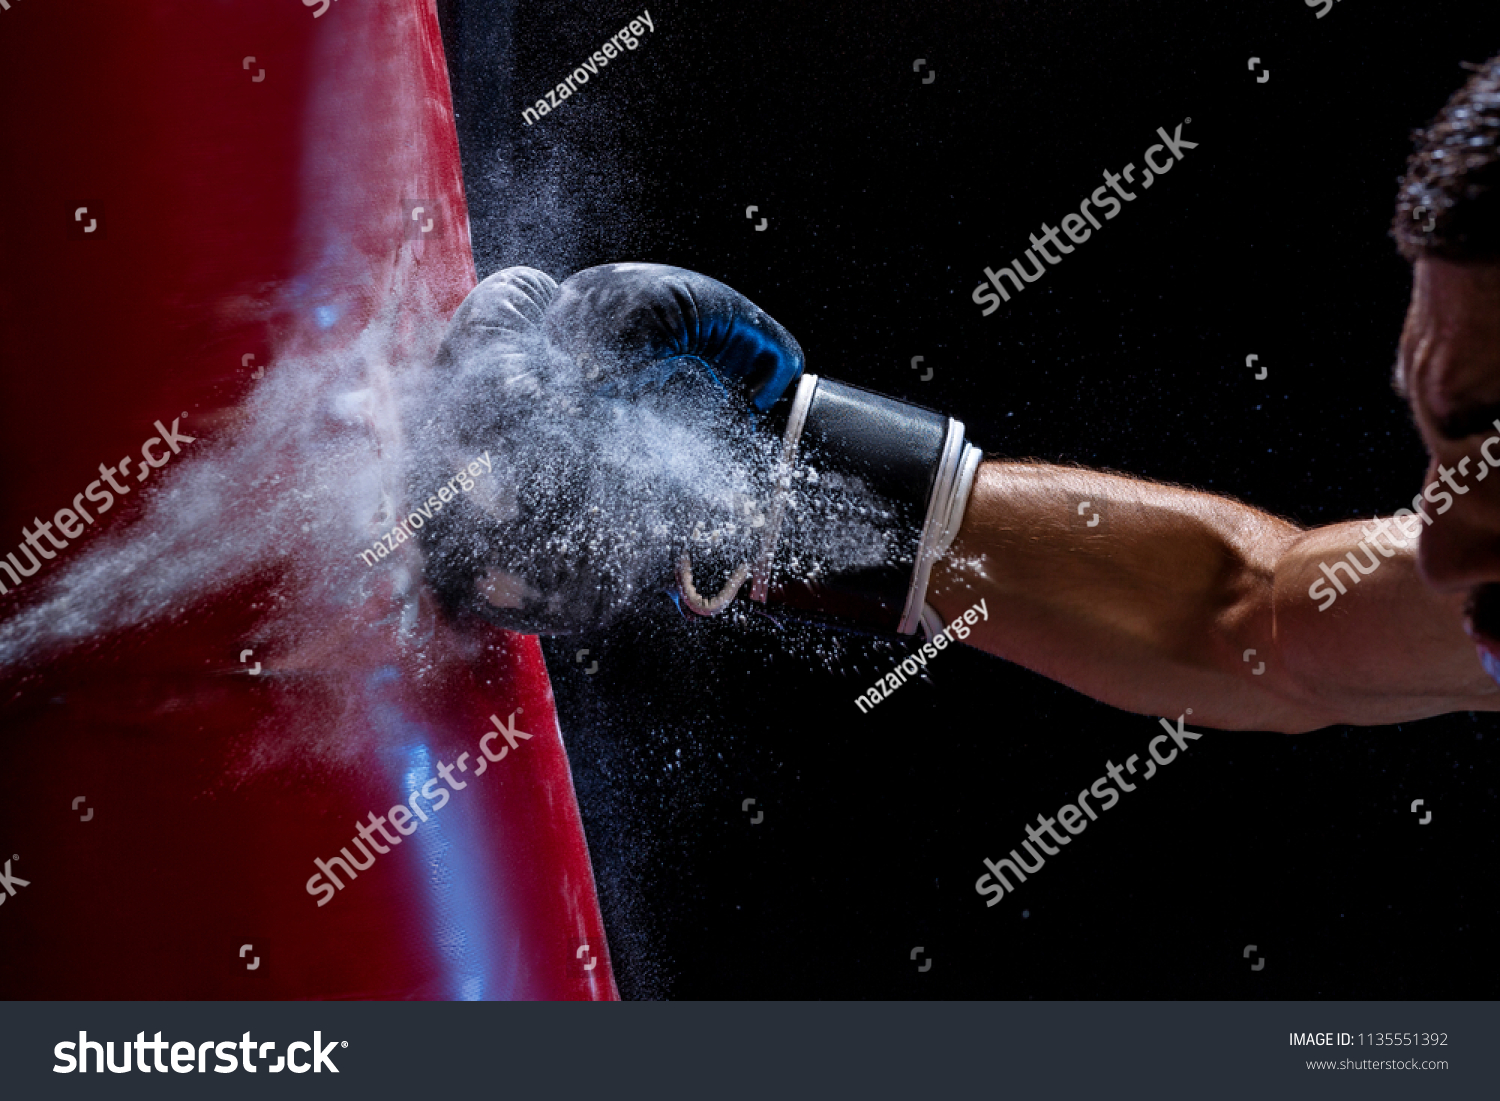 Close-up hand of boxer at the moment of impact on punching bag over black background #1135551392